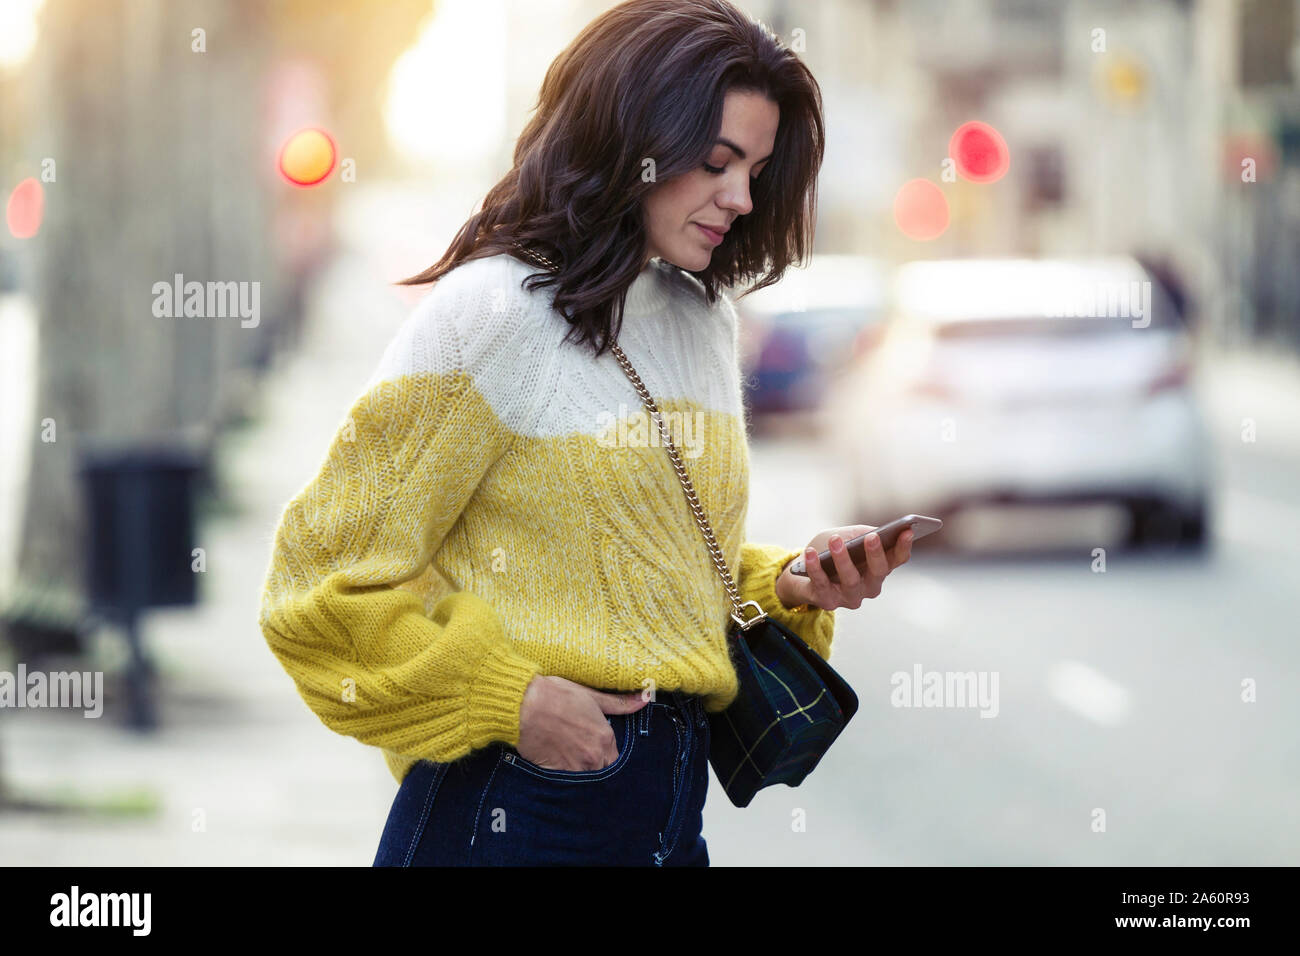 Brunette woman using her smartphone in the city Stock Photo